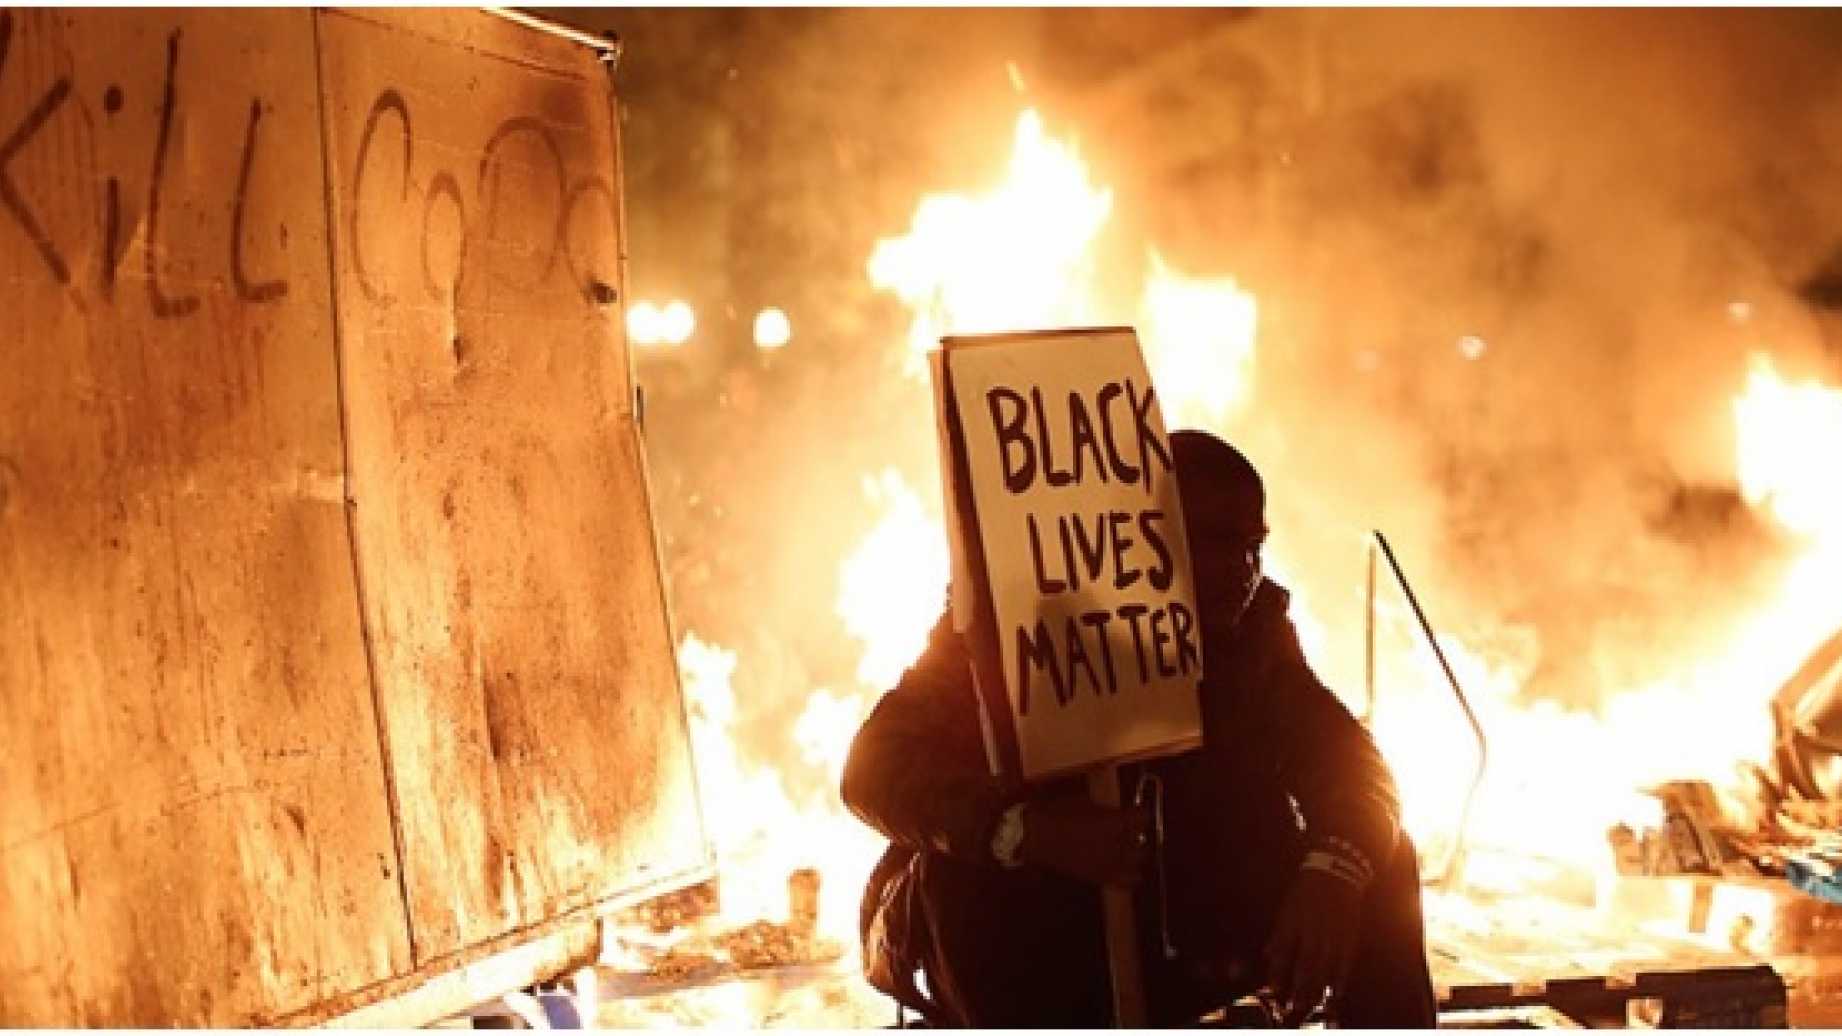 Black Lives Matter burns down their own neighborhood to show how oppressed they are.